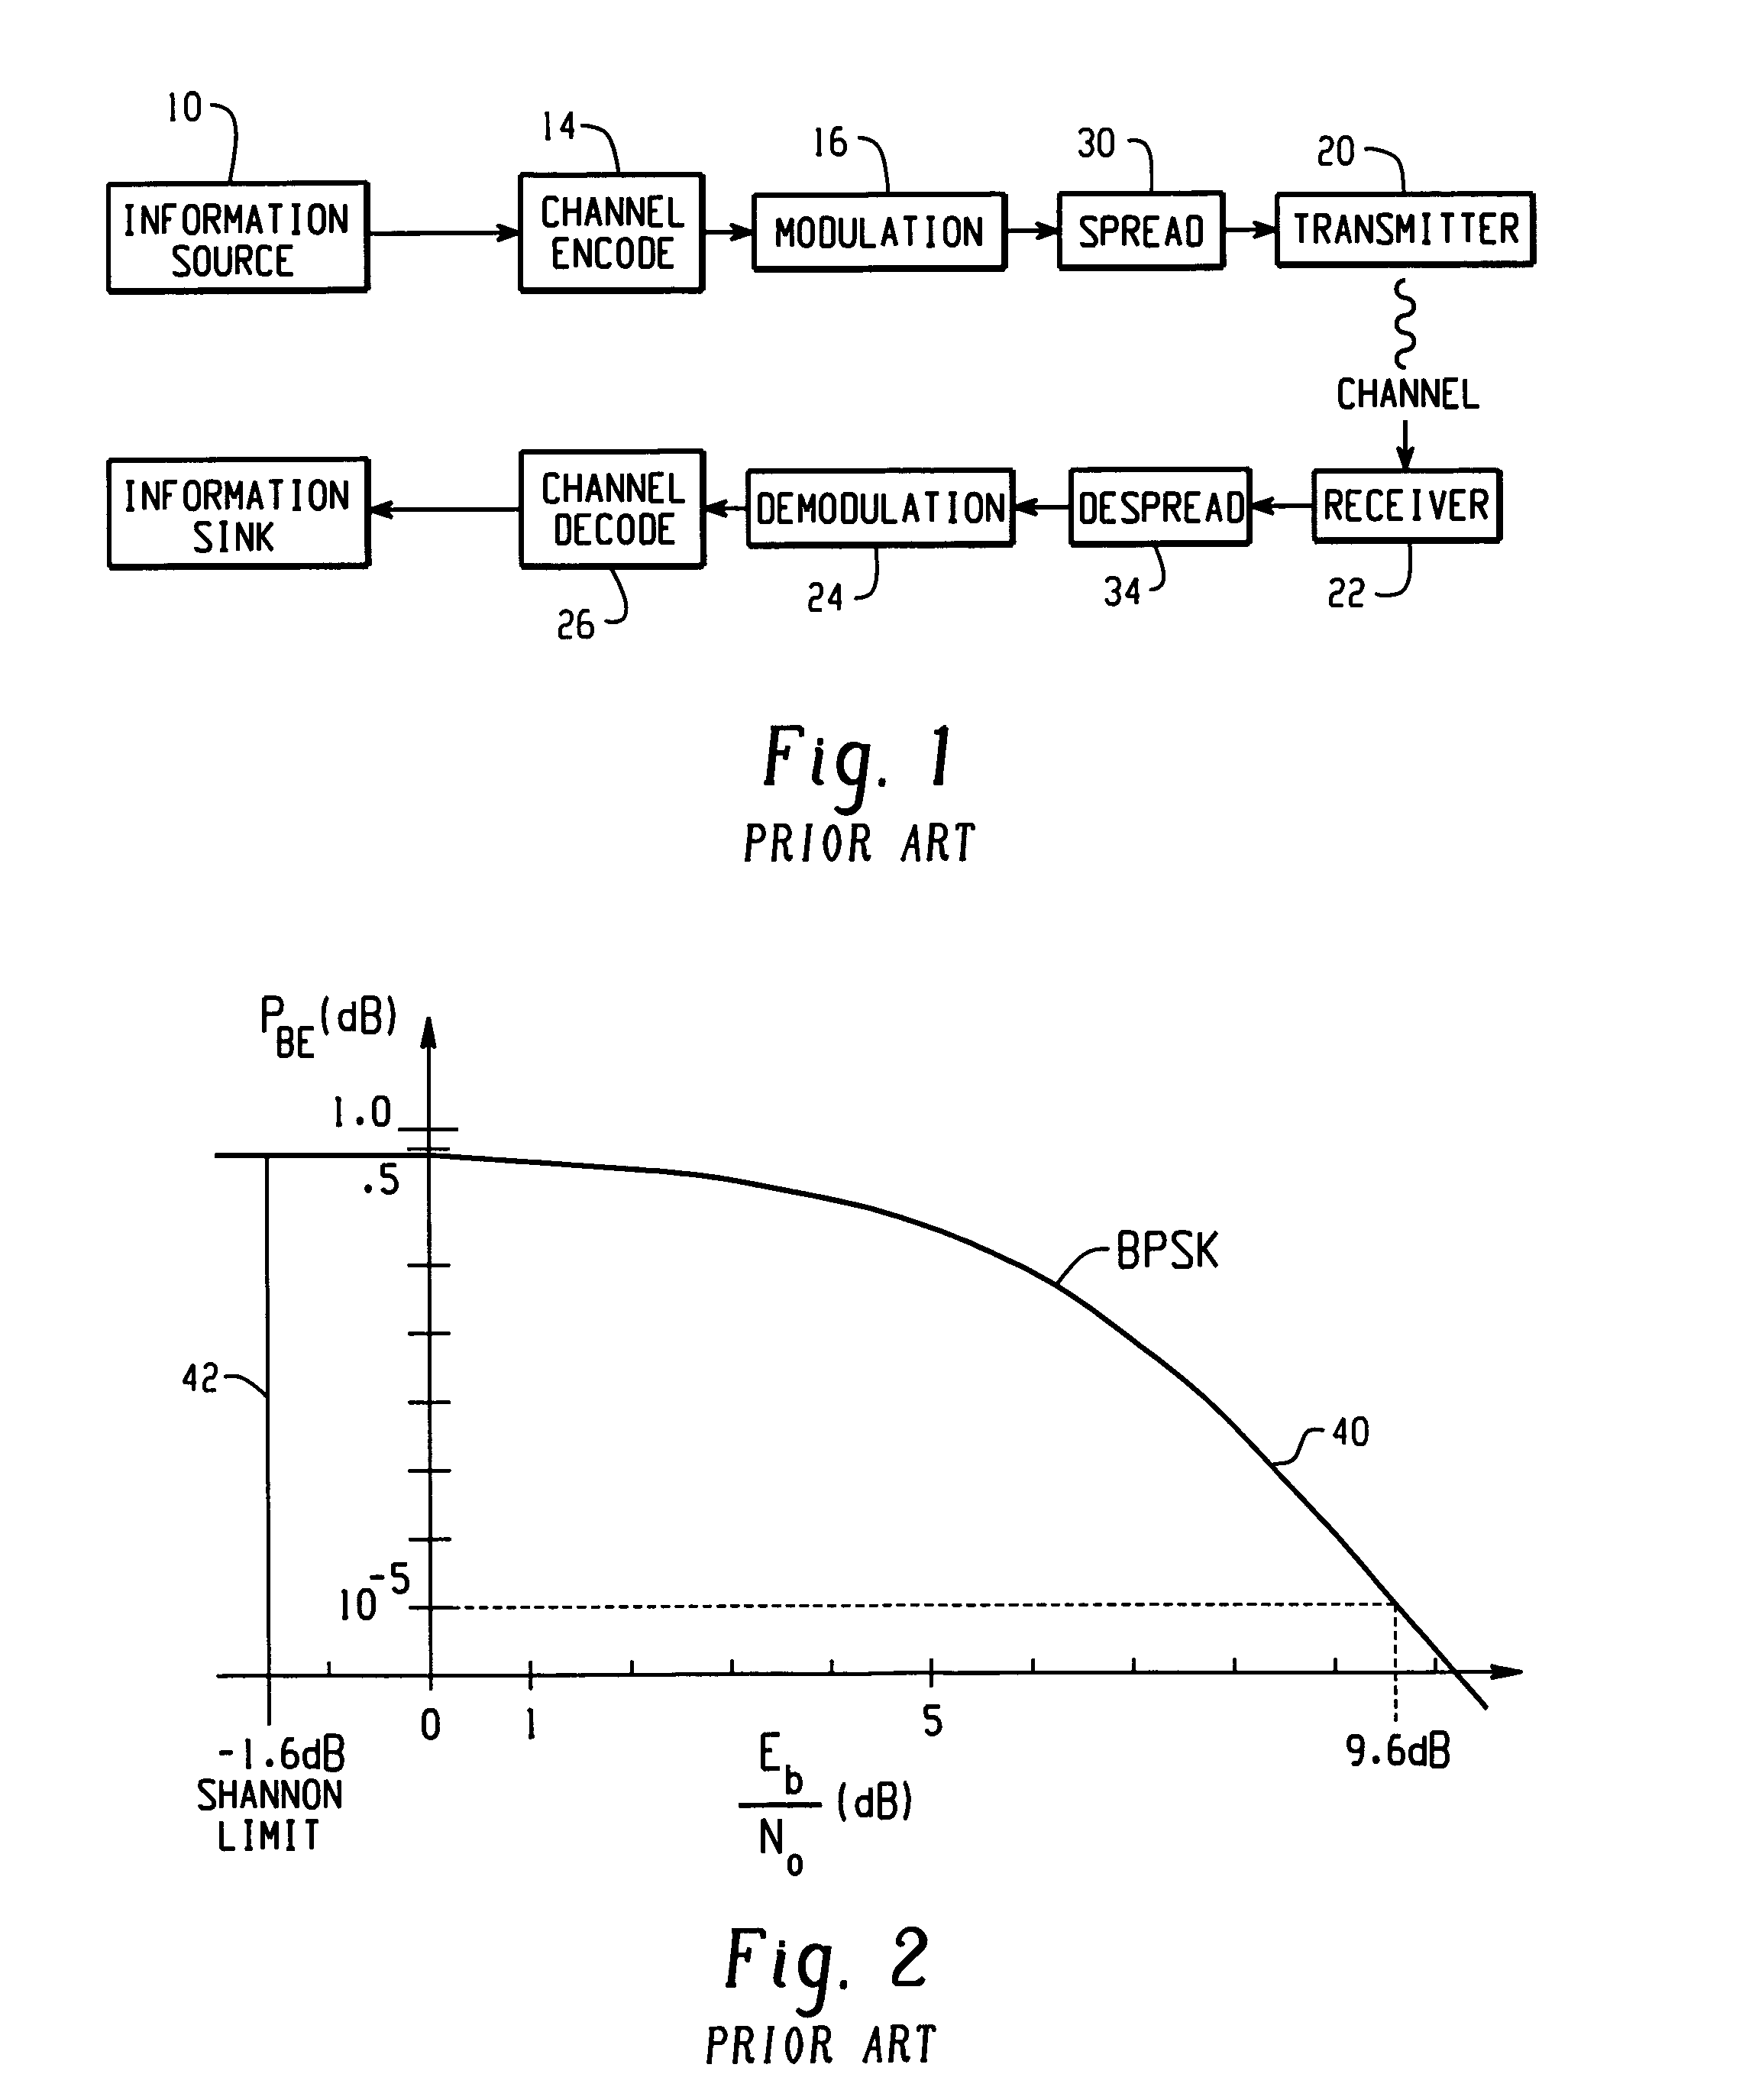 Apparatus and method of CTCM encoding and decoding for a digital communication system